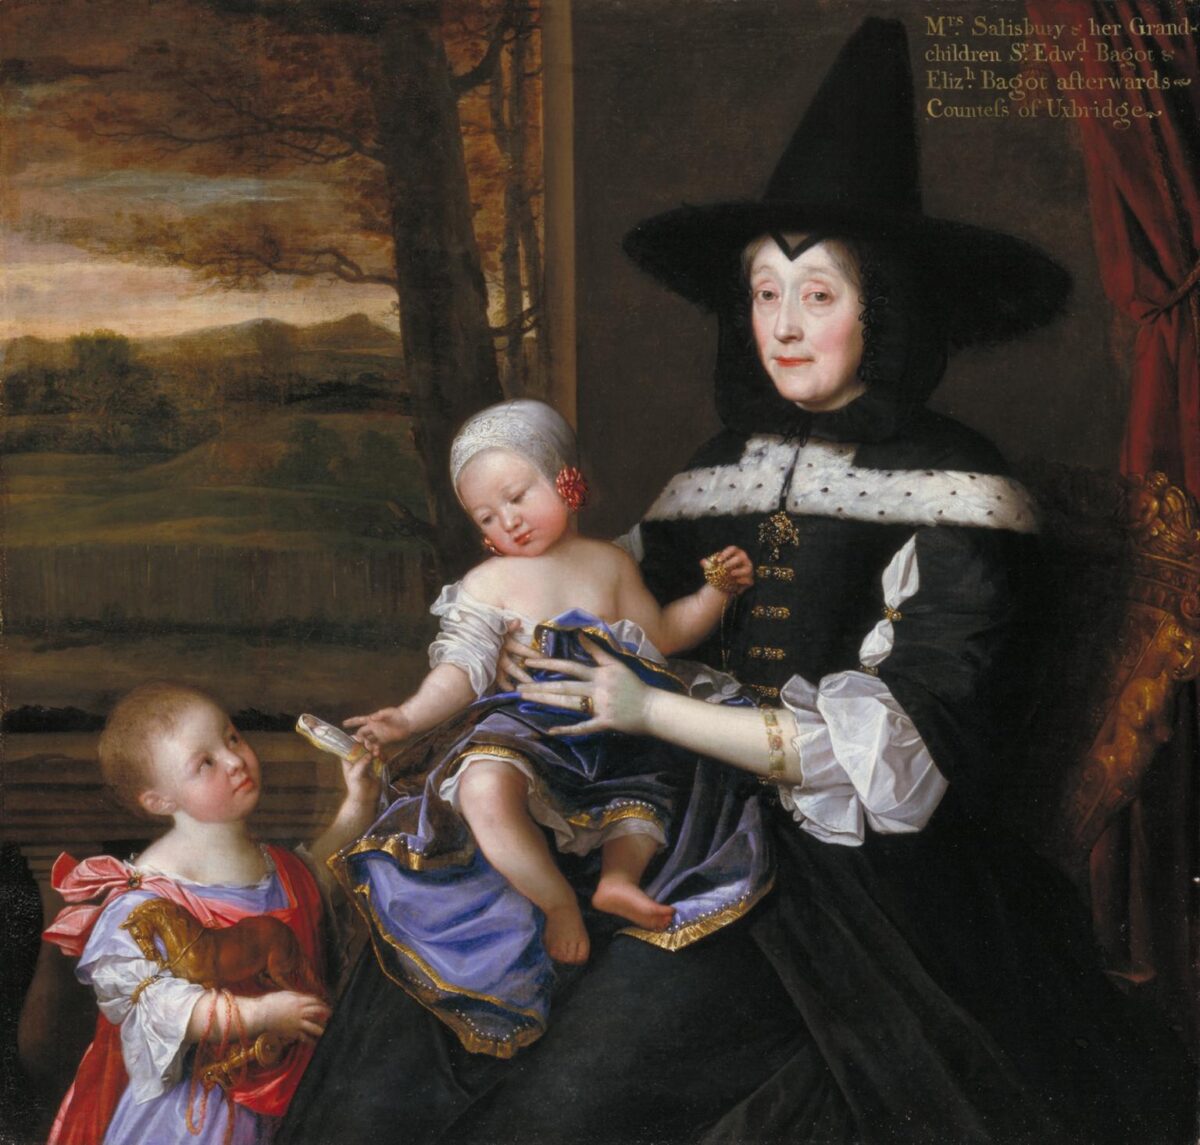 Portrait of Mrs Salesbury with her Grandchildren Edward and Elizabeth Bagot 1675-6 John Michael Wright 1617-1694 Presented by the Patrons of British Art through the Tate Gallery Foundation 1993 http://www.tate.org.uk/art/work/T06750